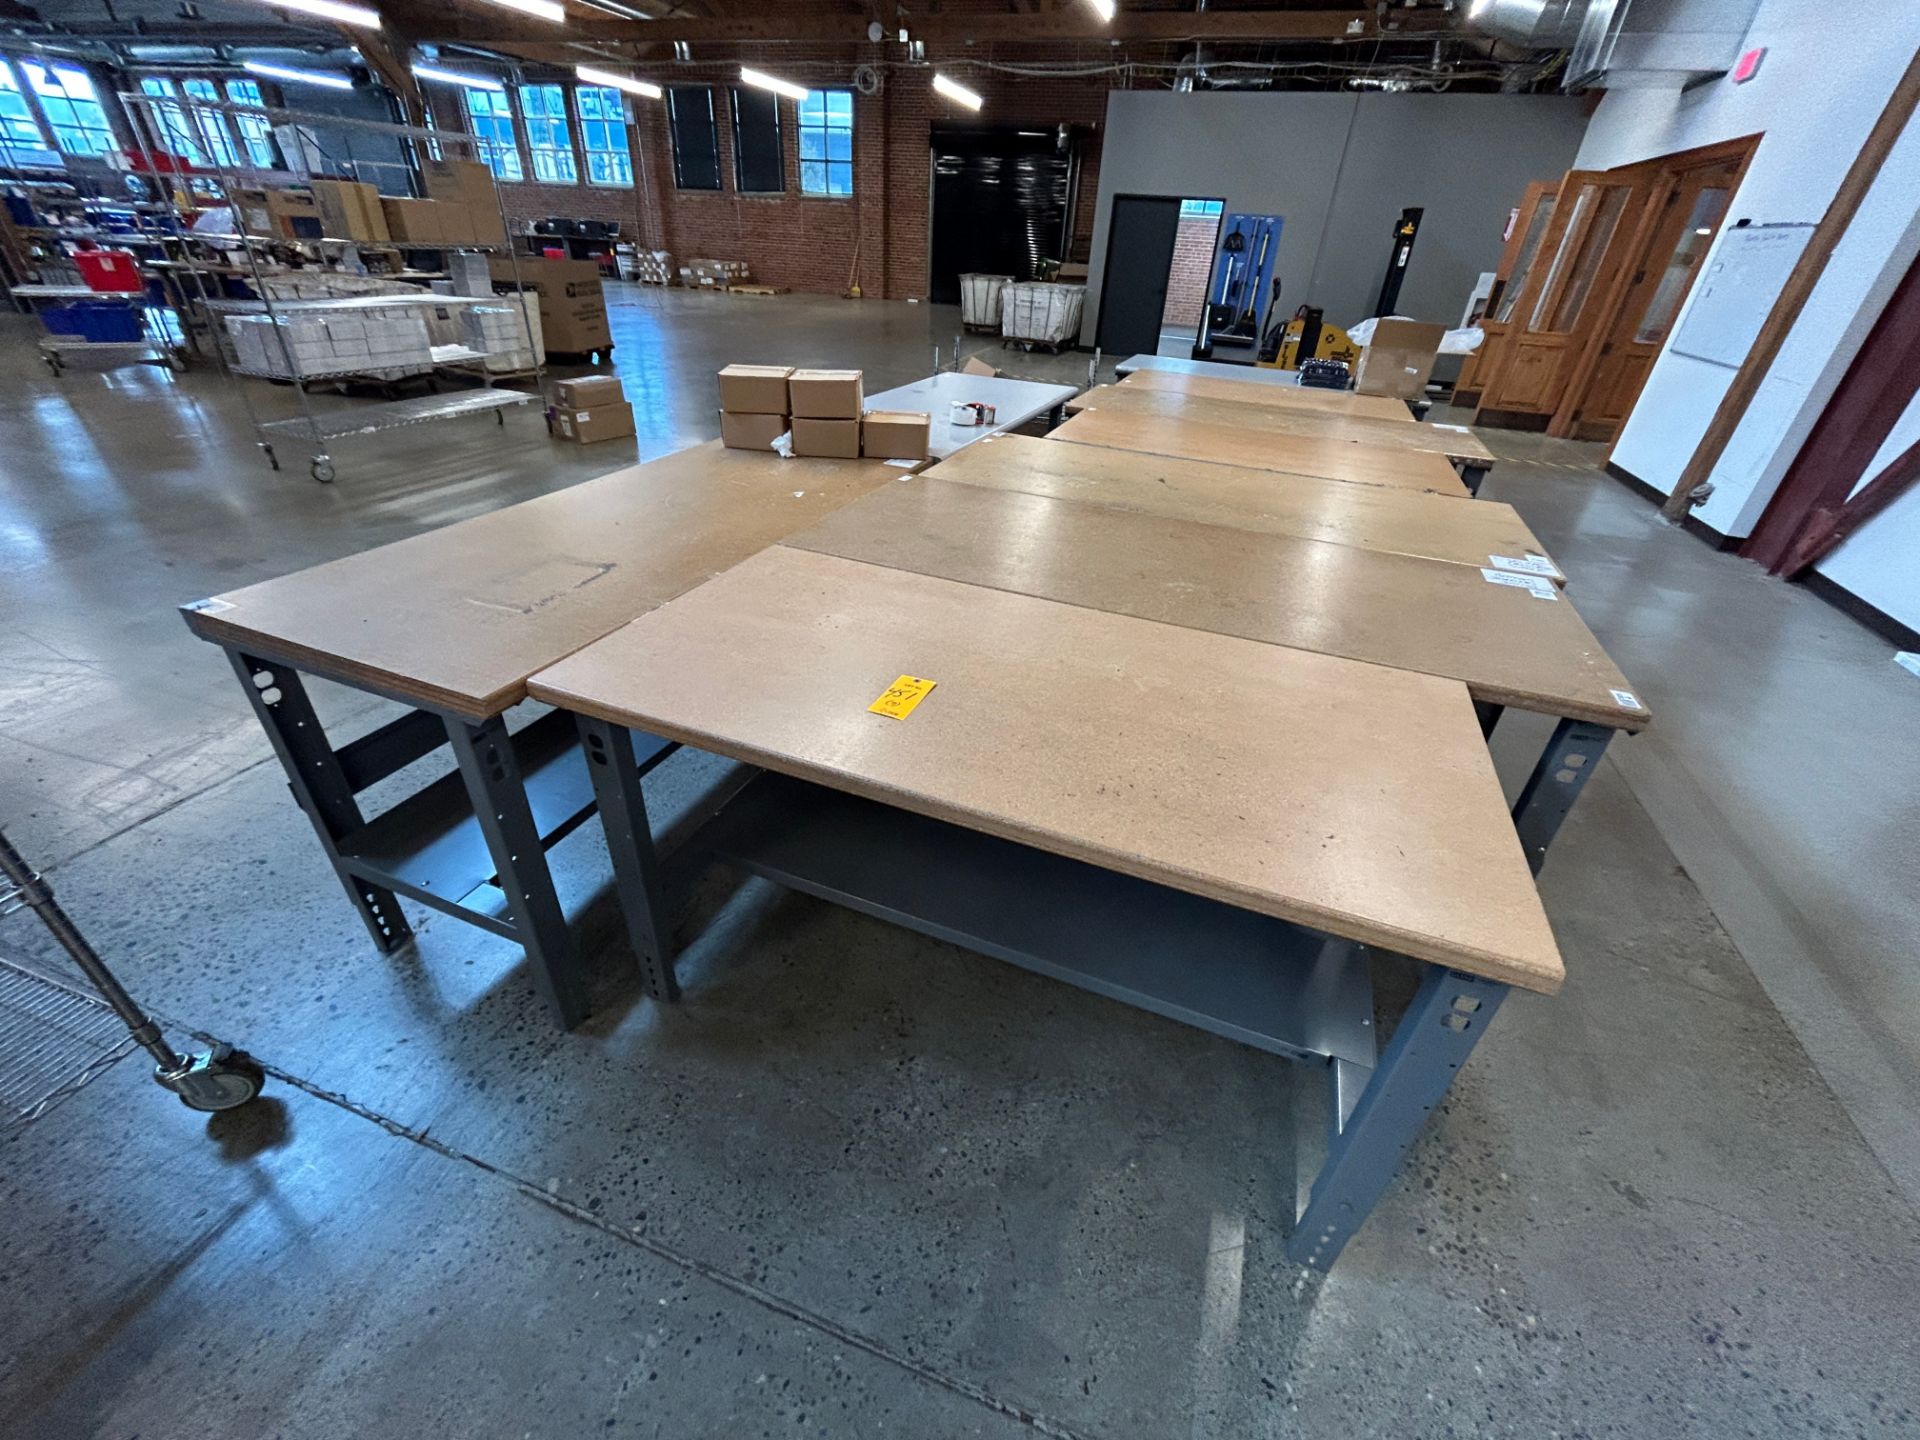 Lot (2) - Steel-Based Tables, with Wood Tops, 5.5 ft. x 3 Ft.